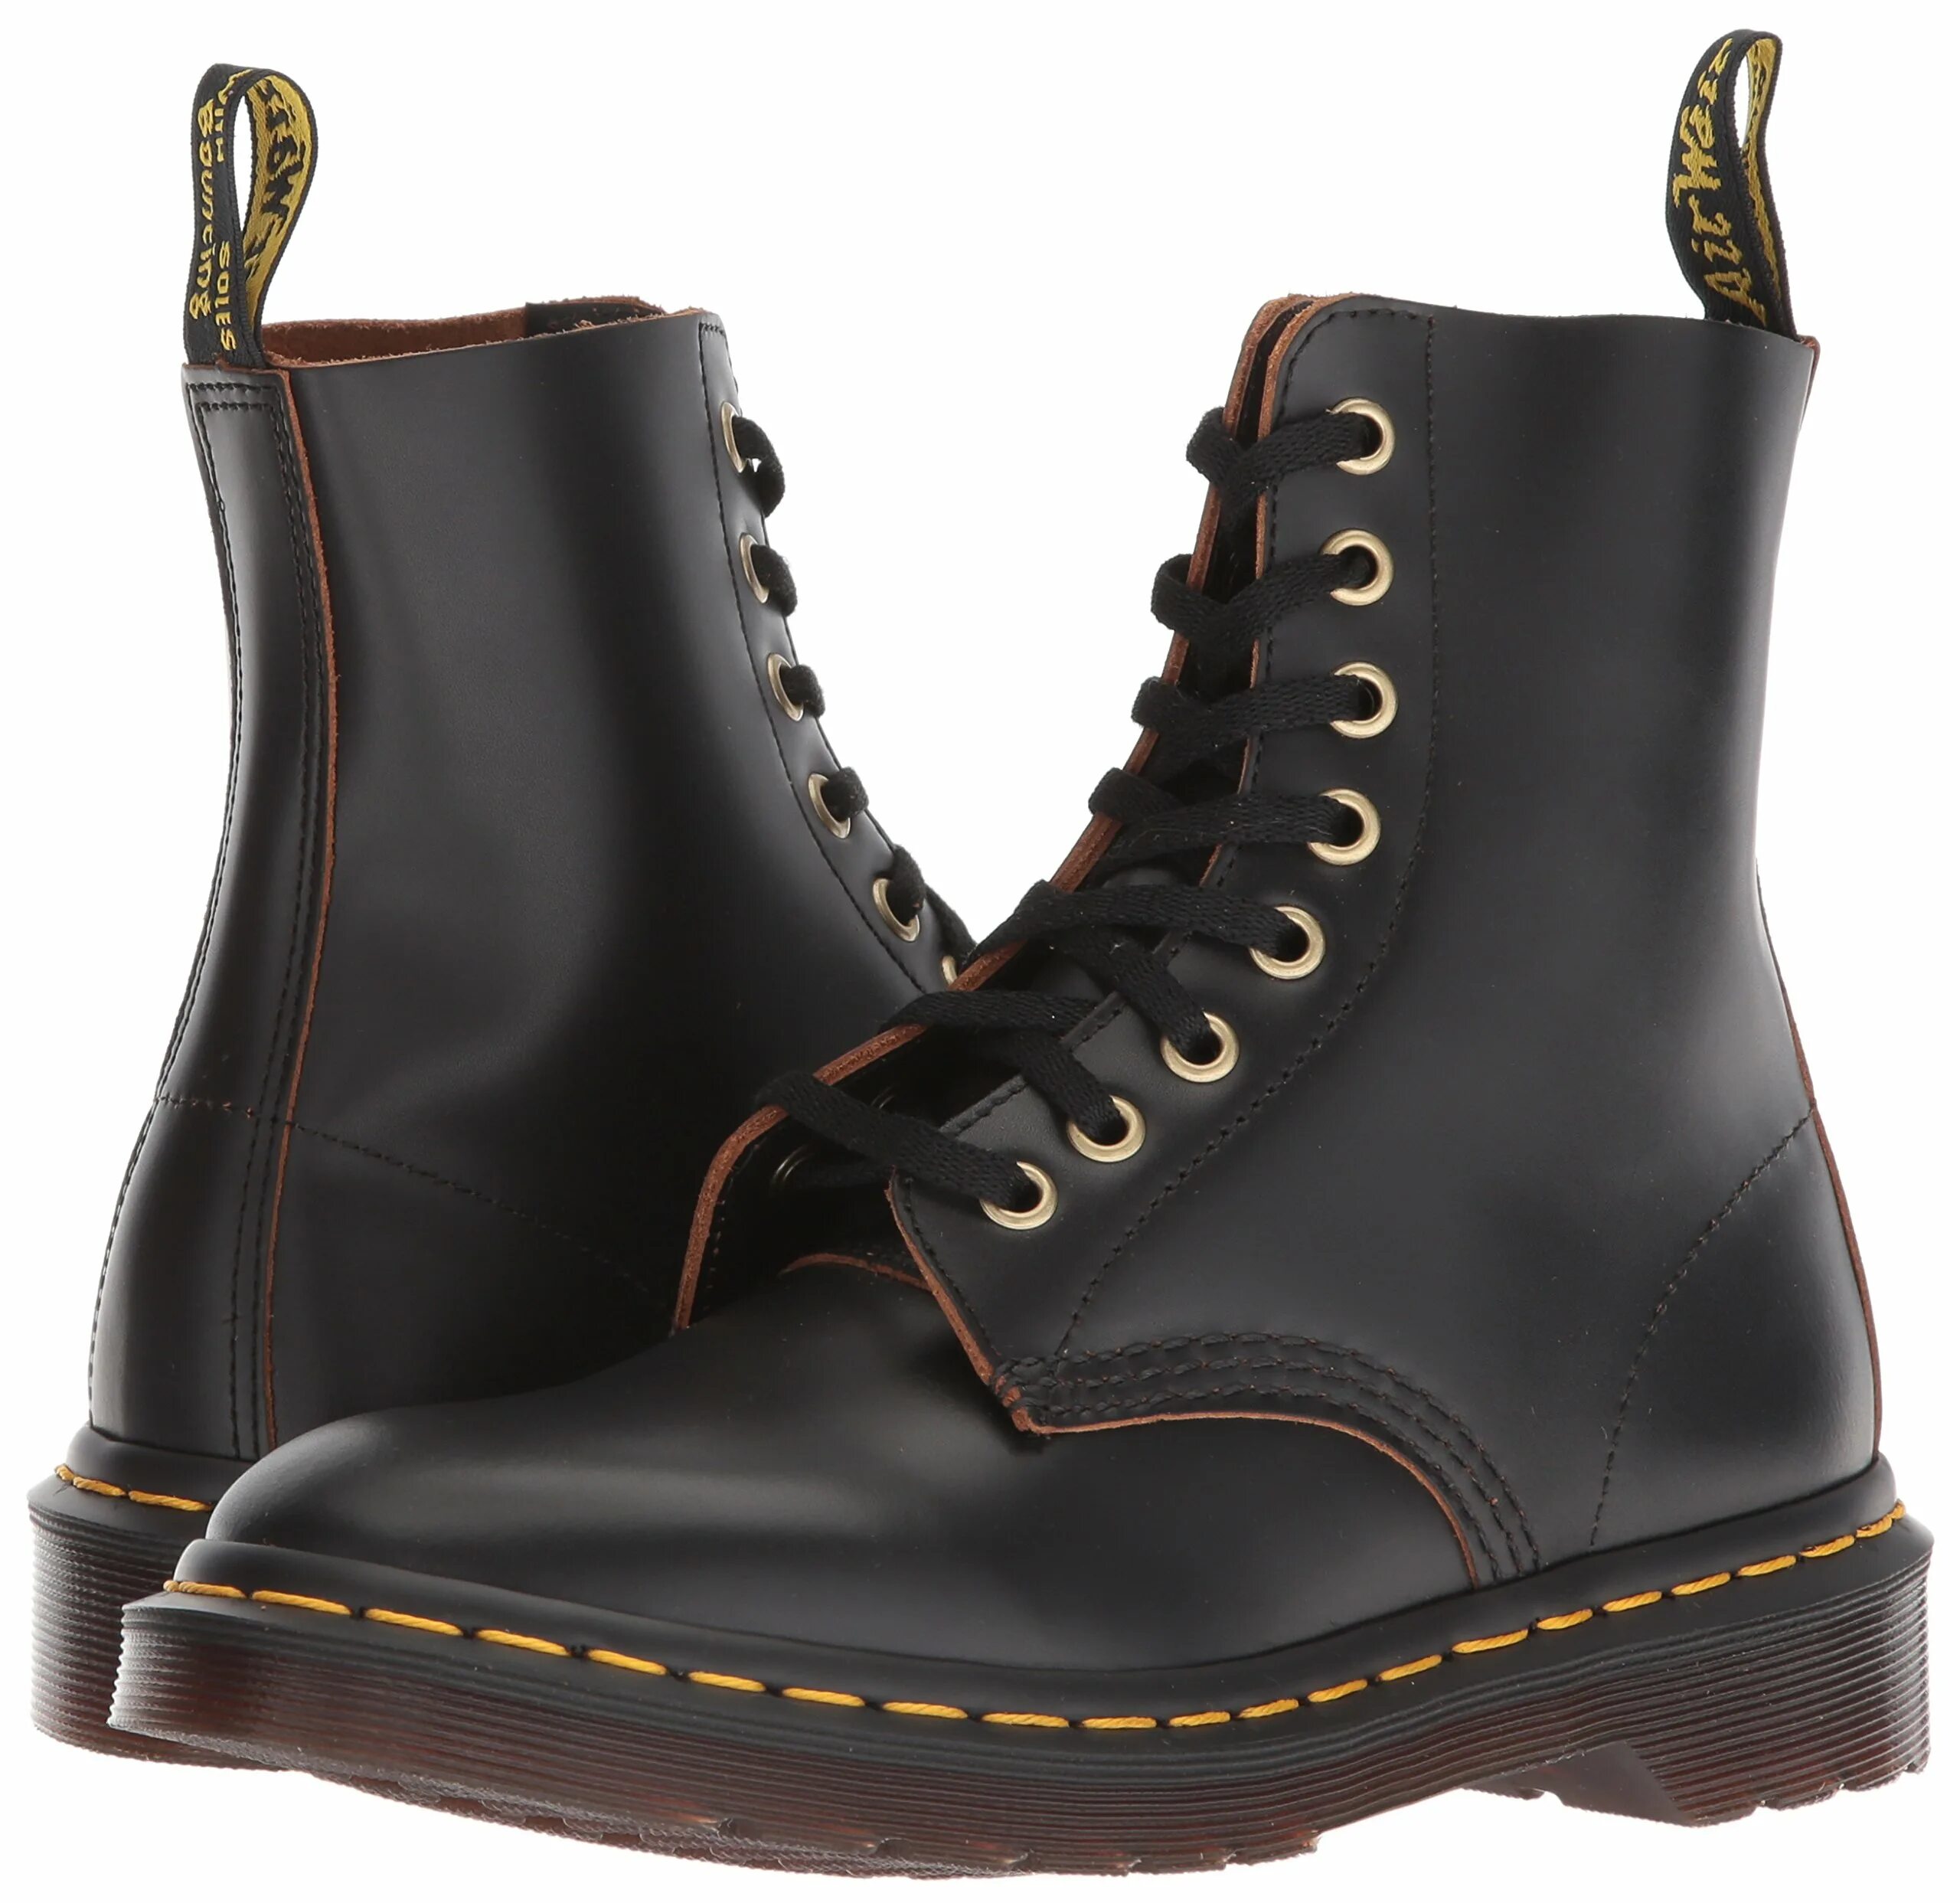 Dr Martens Antique Temperley 1460. Dr Martens 1460 Pascal подошва. Dr.Martens 1416 Pascal. Dr. Marten’s 1460 Vintage smooth Leather Lace up Boots.. Martens pascal